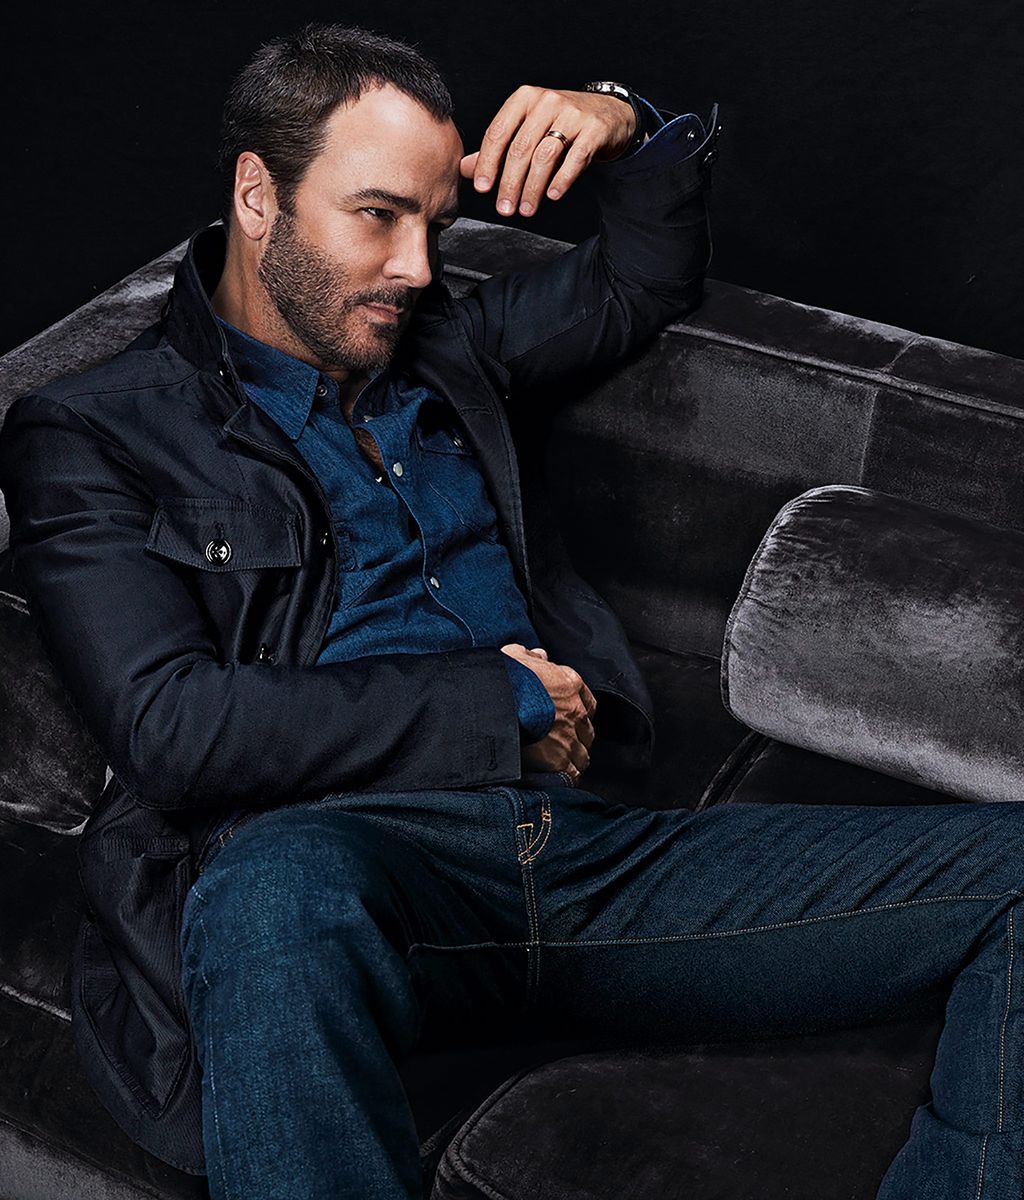 After Years of Selling Sex, Tom Ford Is Seeking Emotion